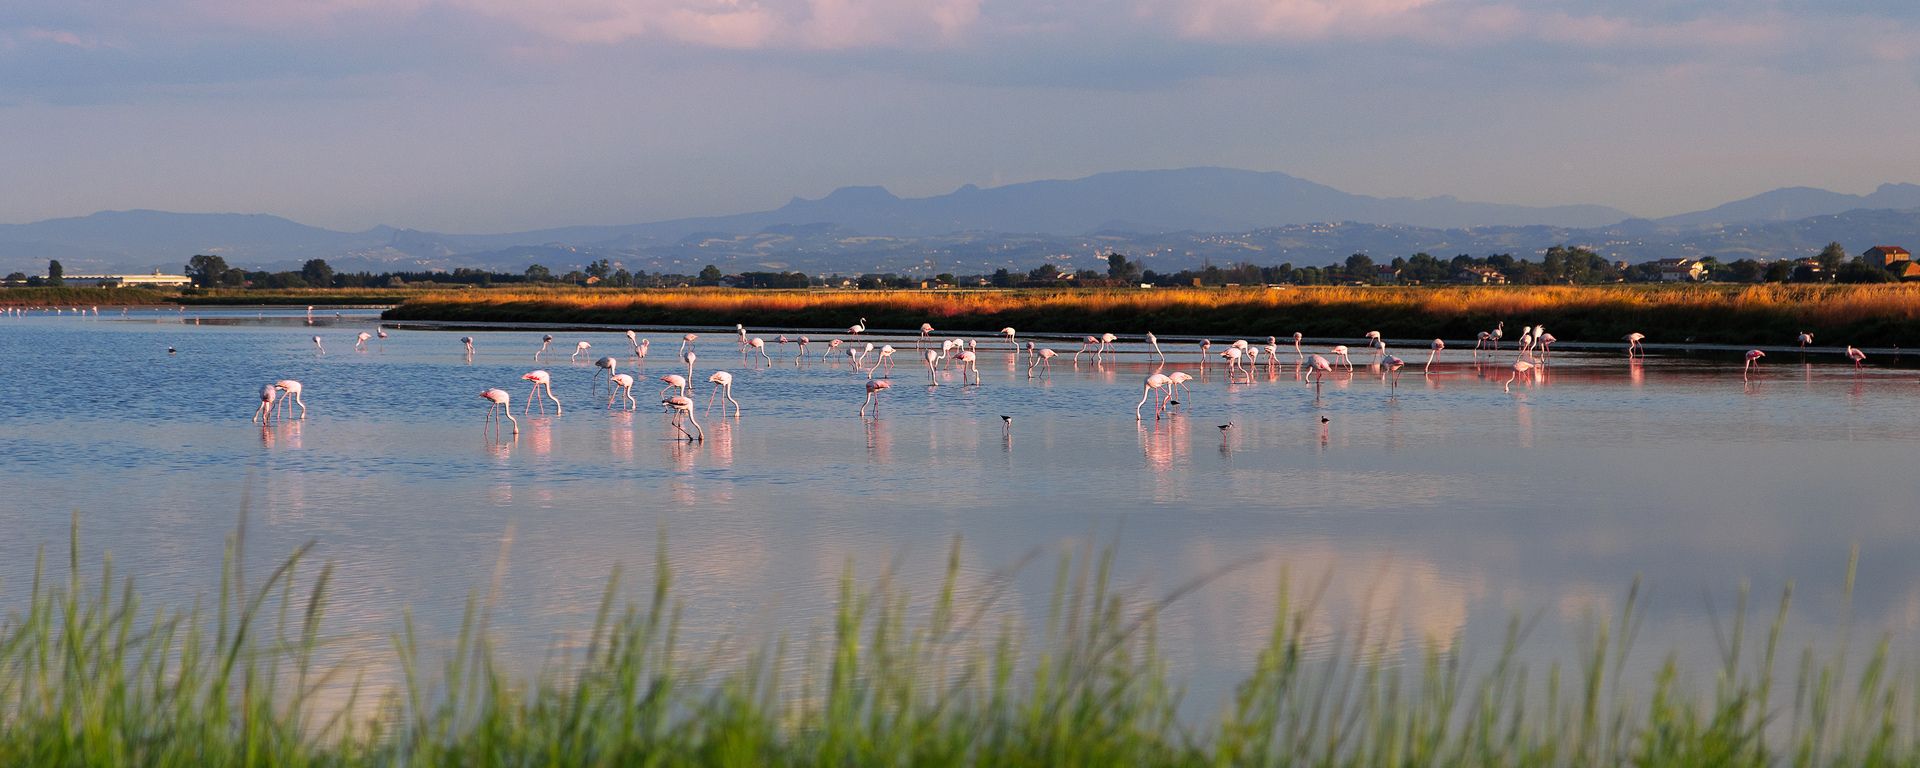 In search of Flamingos